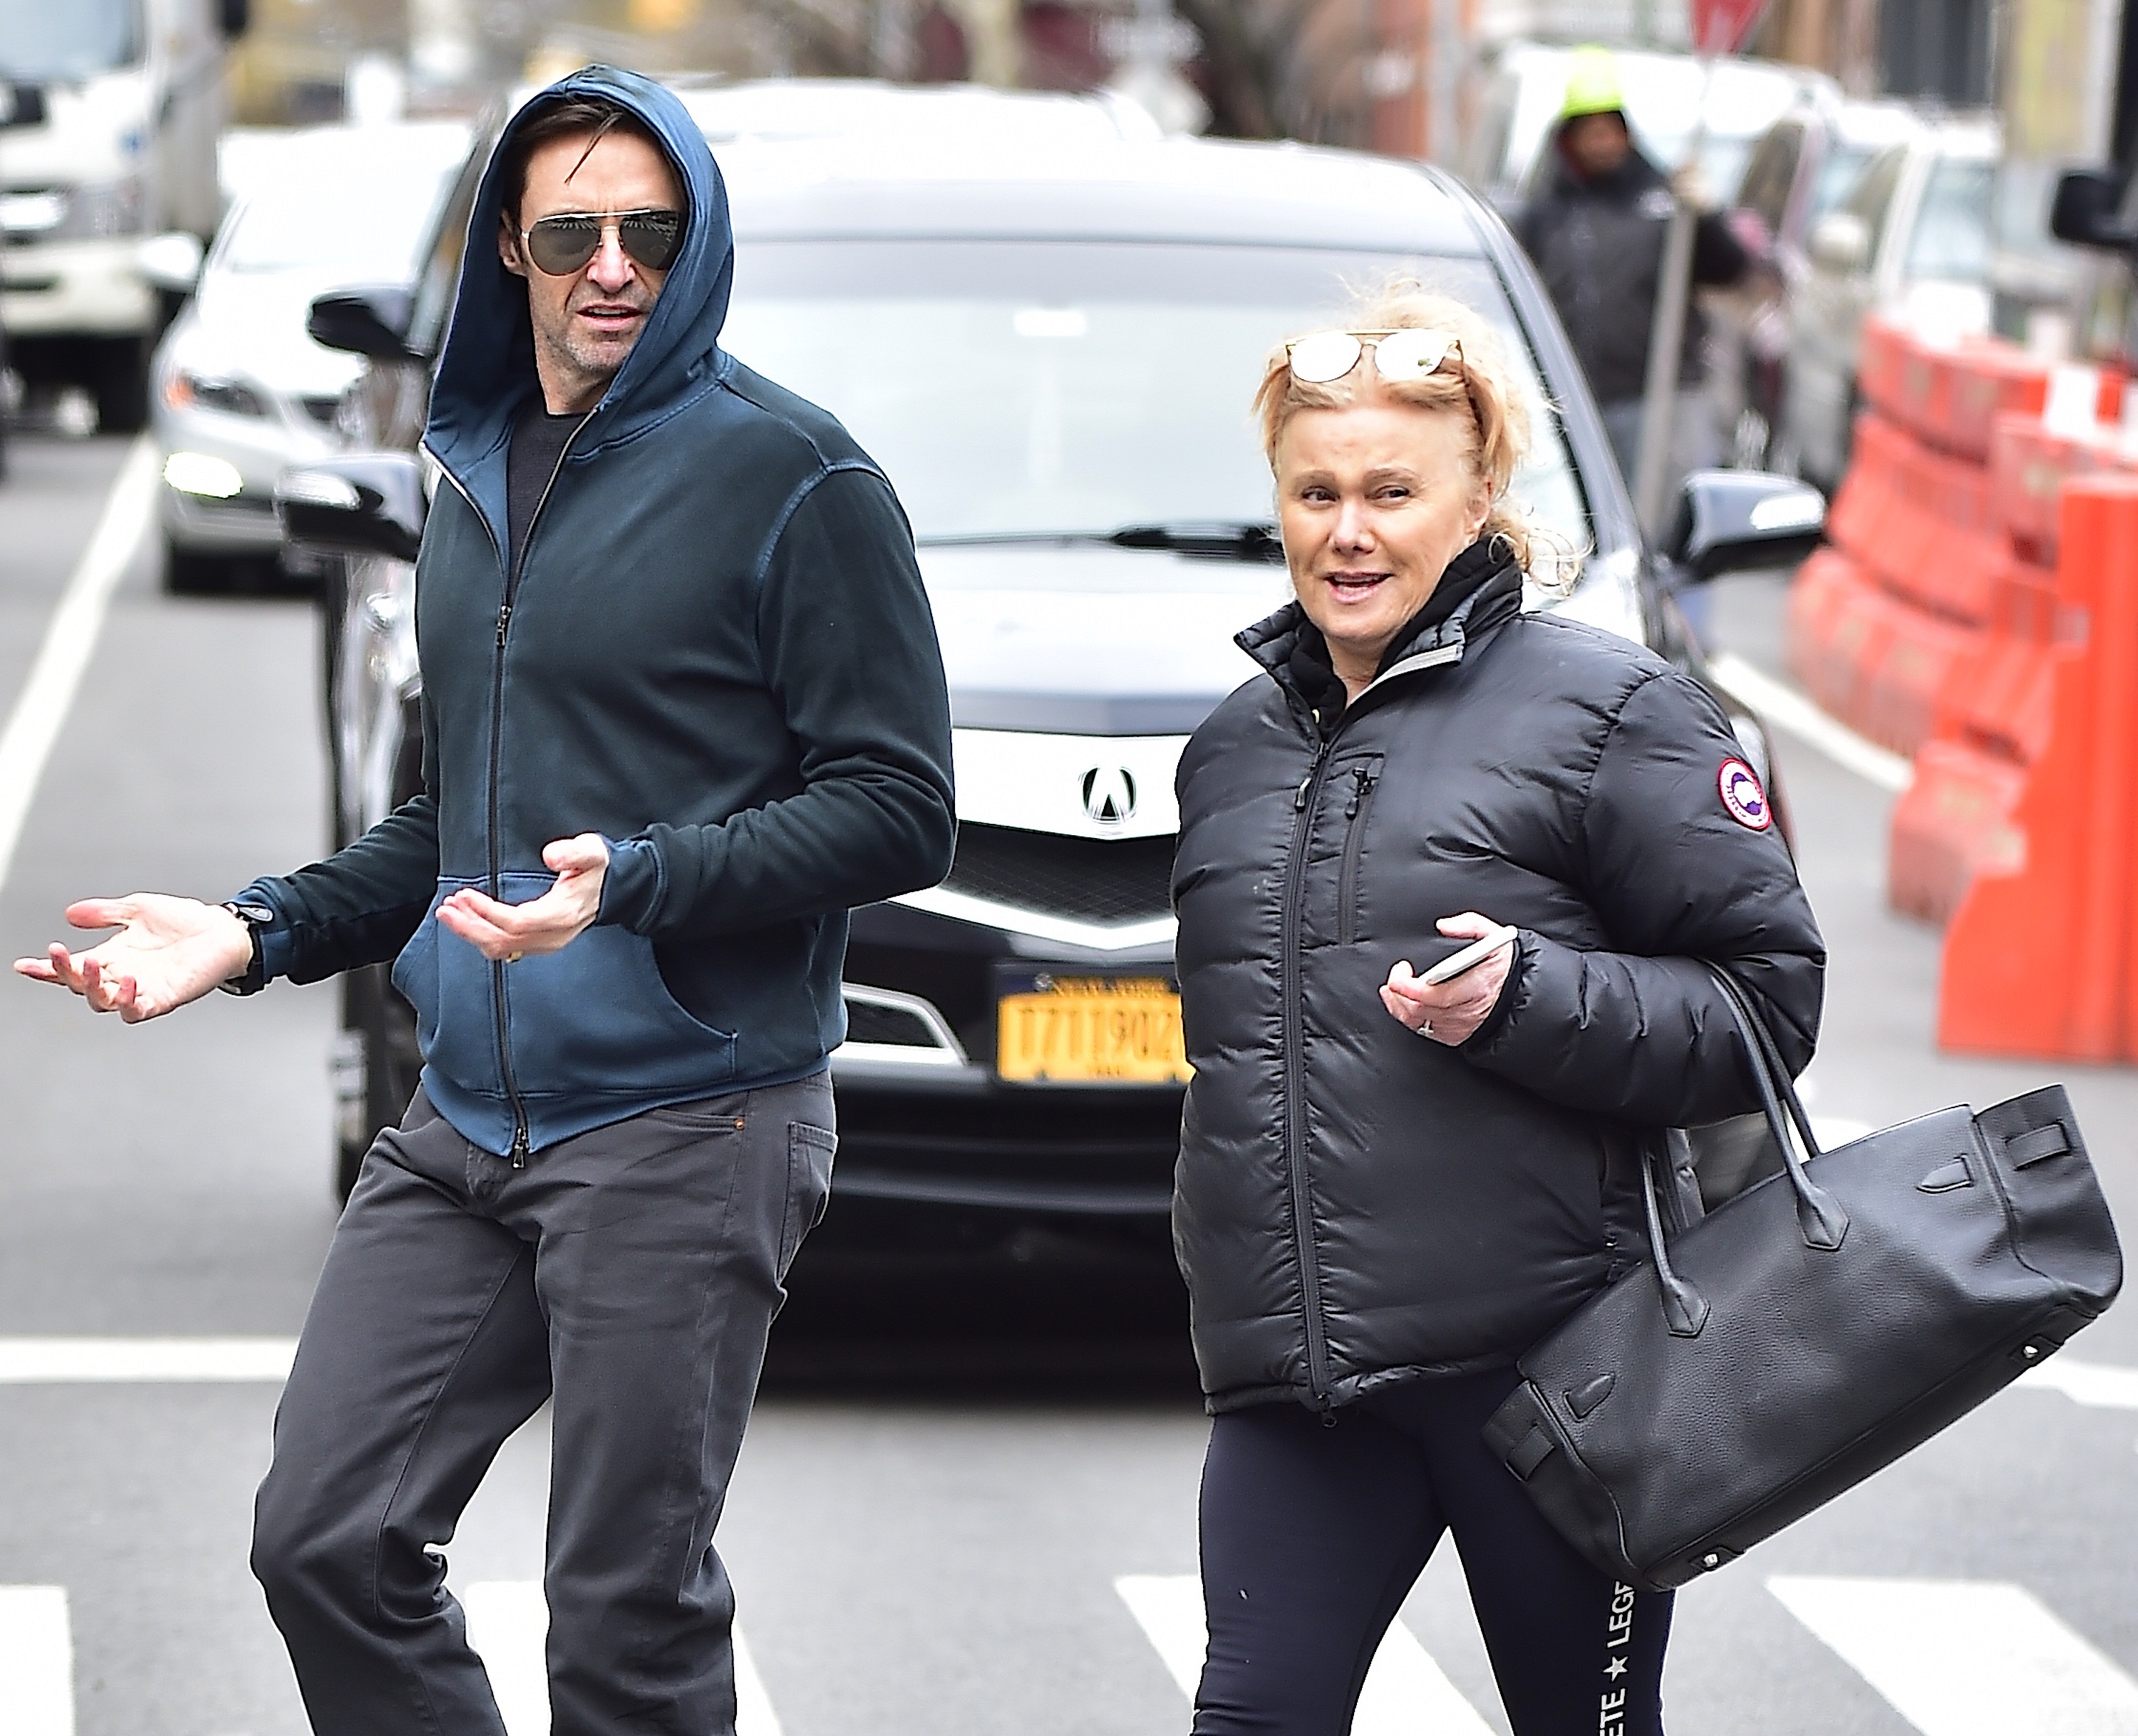 Hugh Jackman and Deborra-Lee Furness seen in West Village, New York City on March 5, 2018 | Source: Getty Images